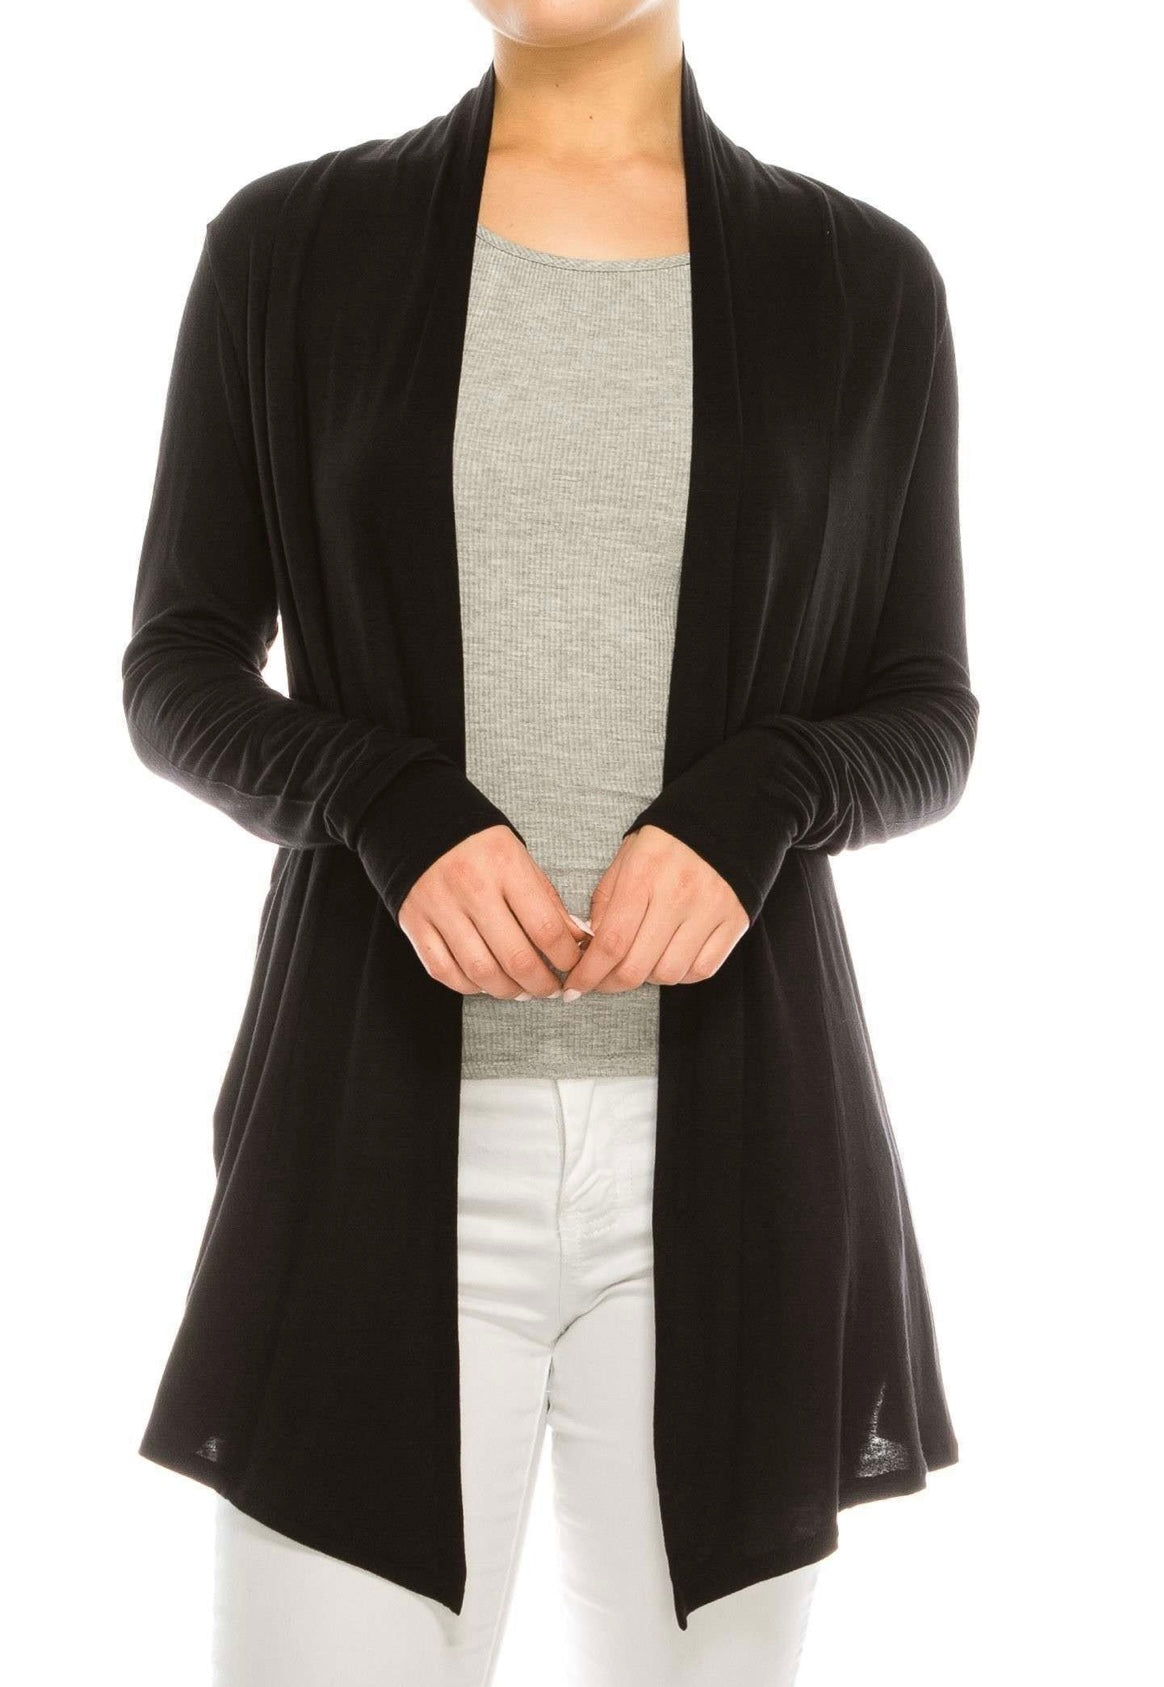 The Everyday Long-Sleeved Open Cardigan         (More Colors)